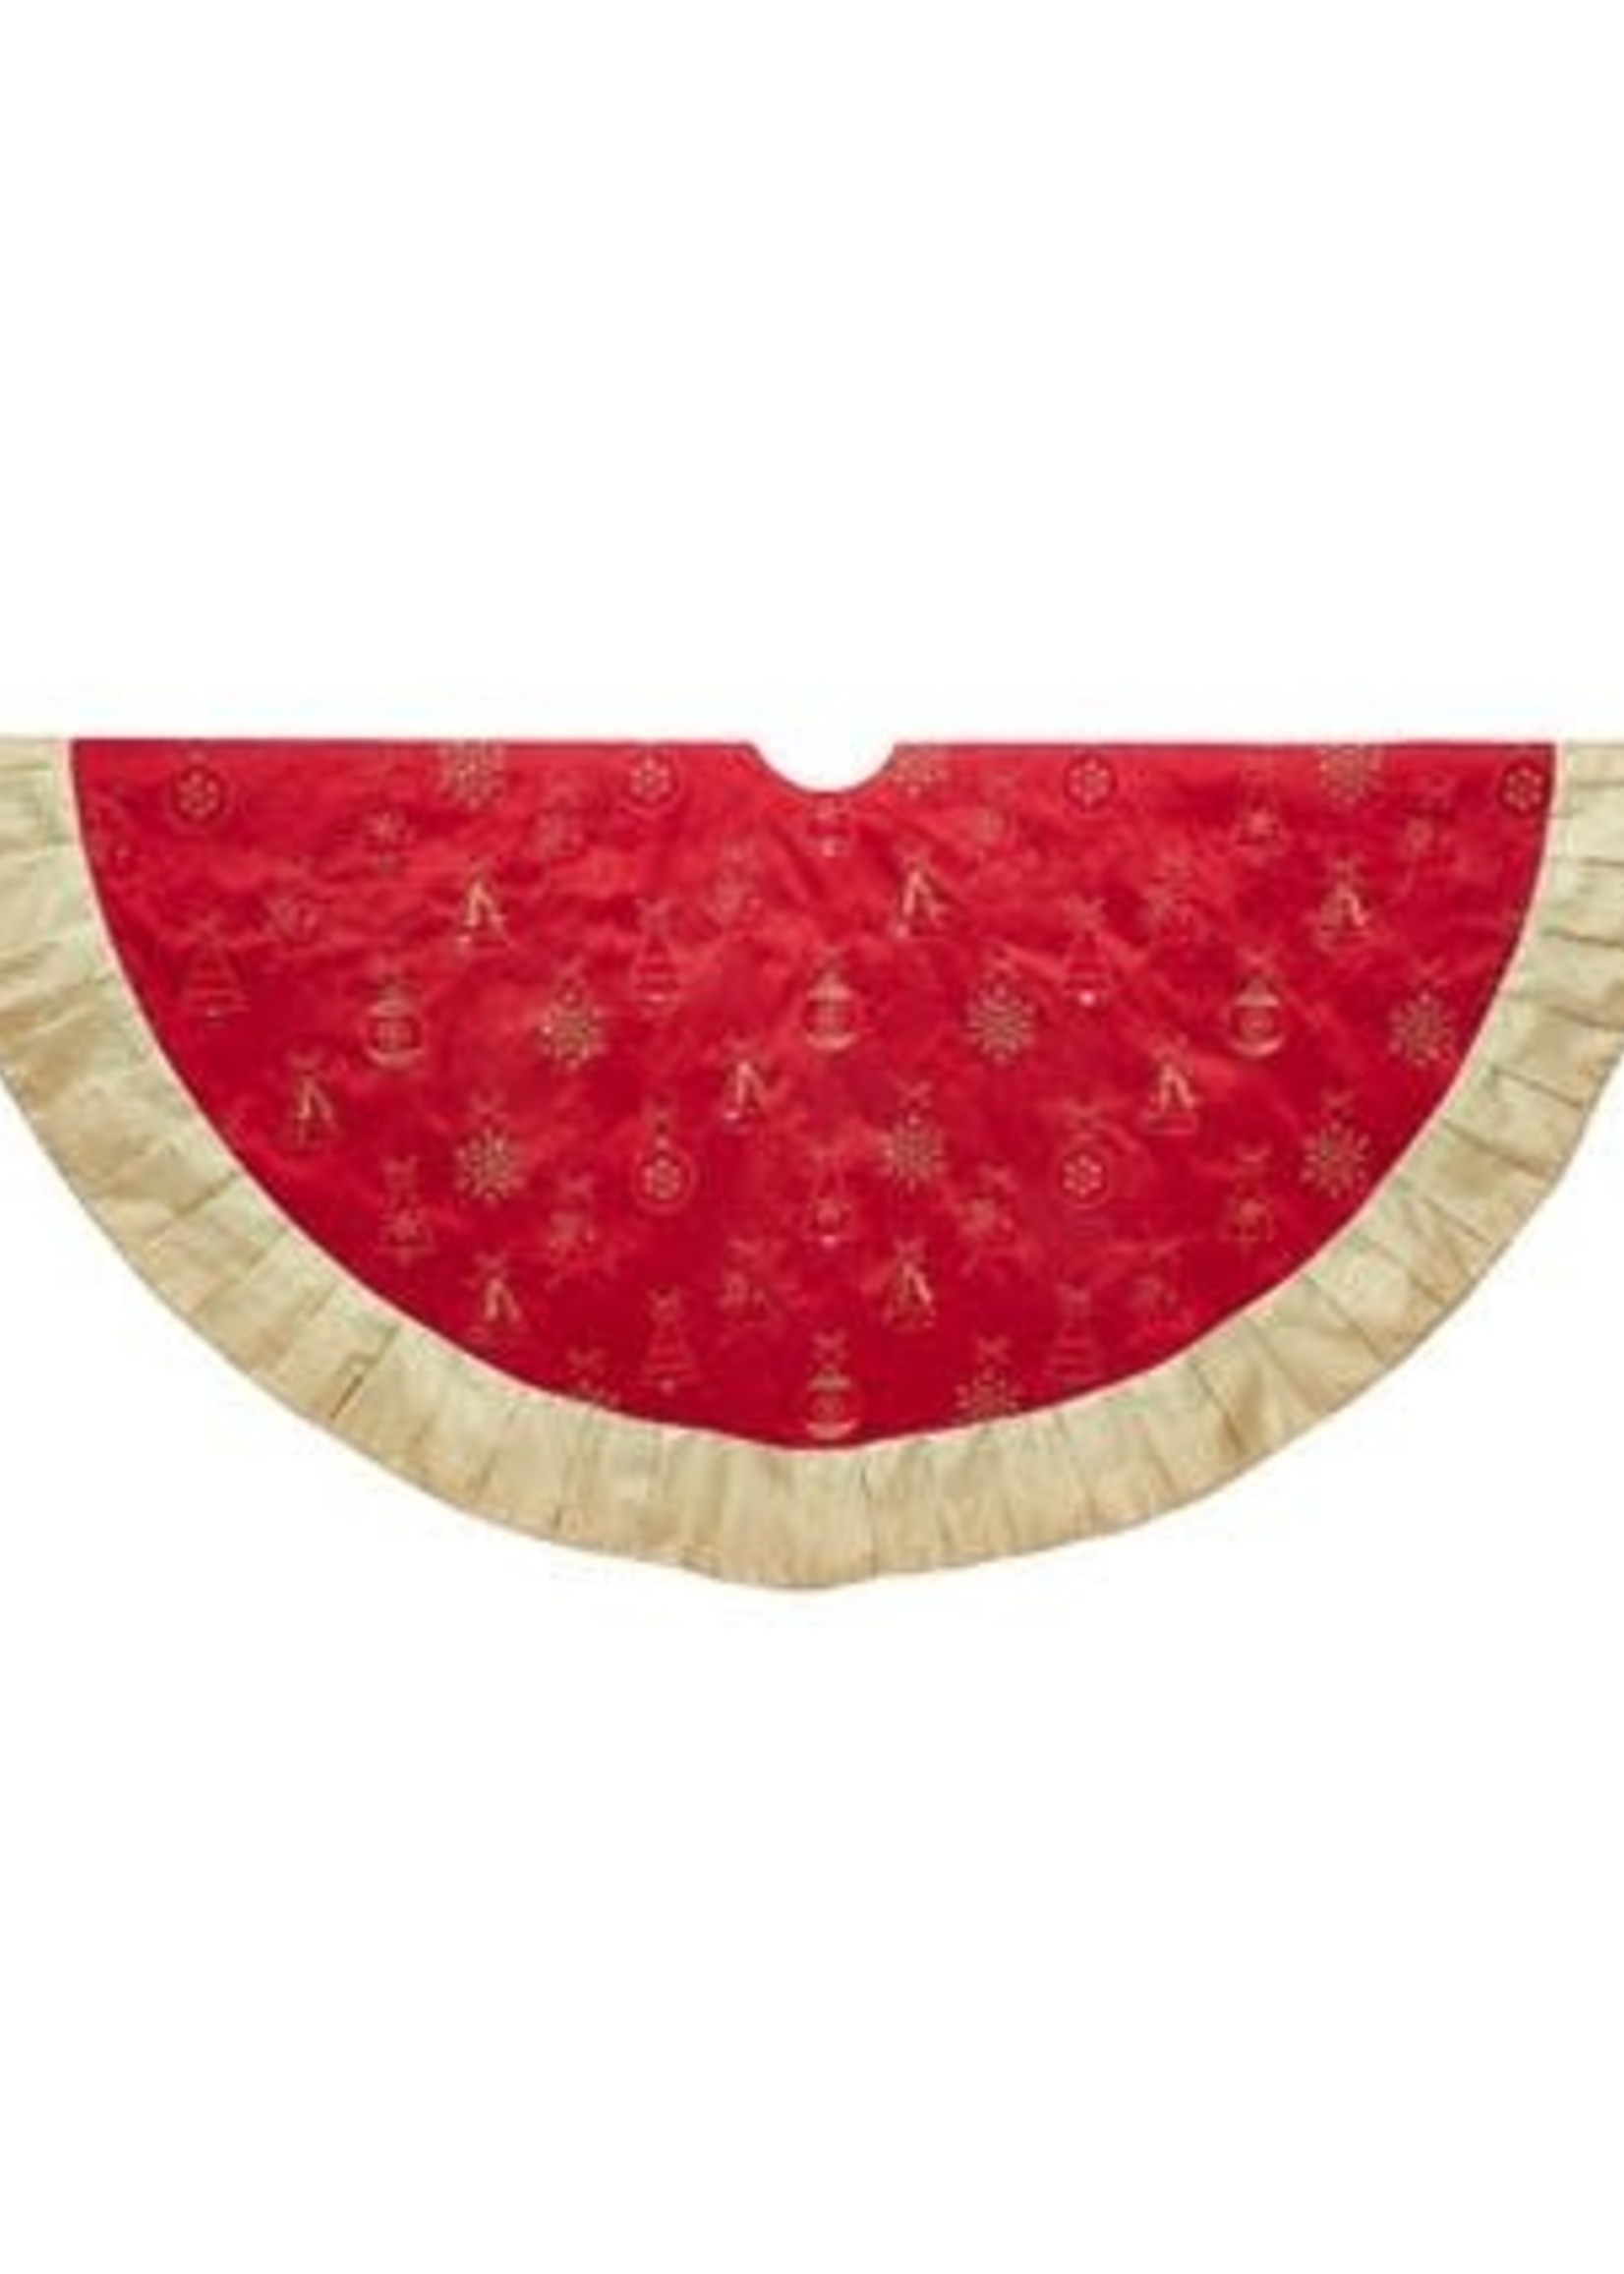 60" Red With Gold Embroidered Ornaments Tree Skirt